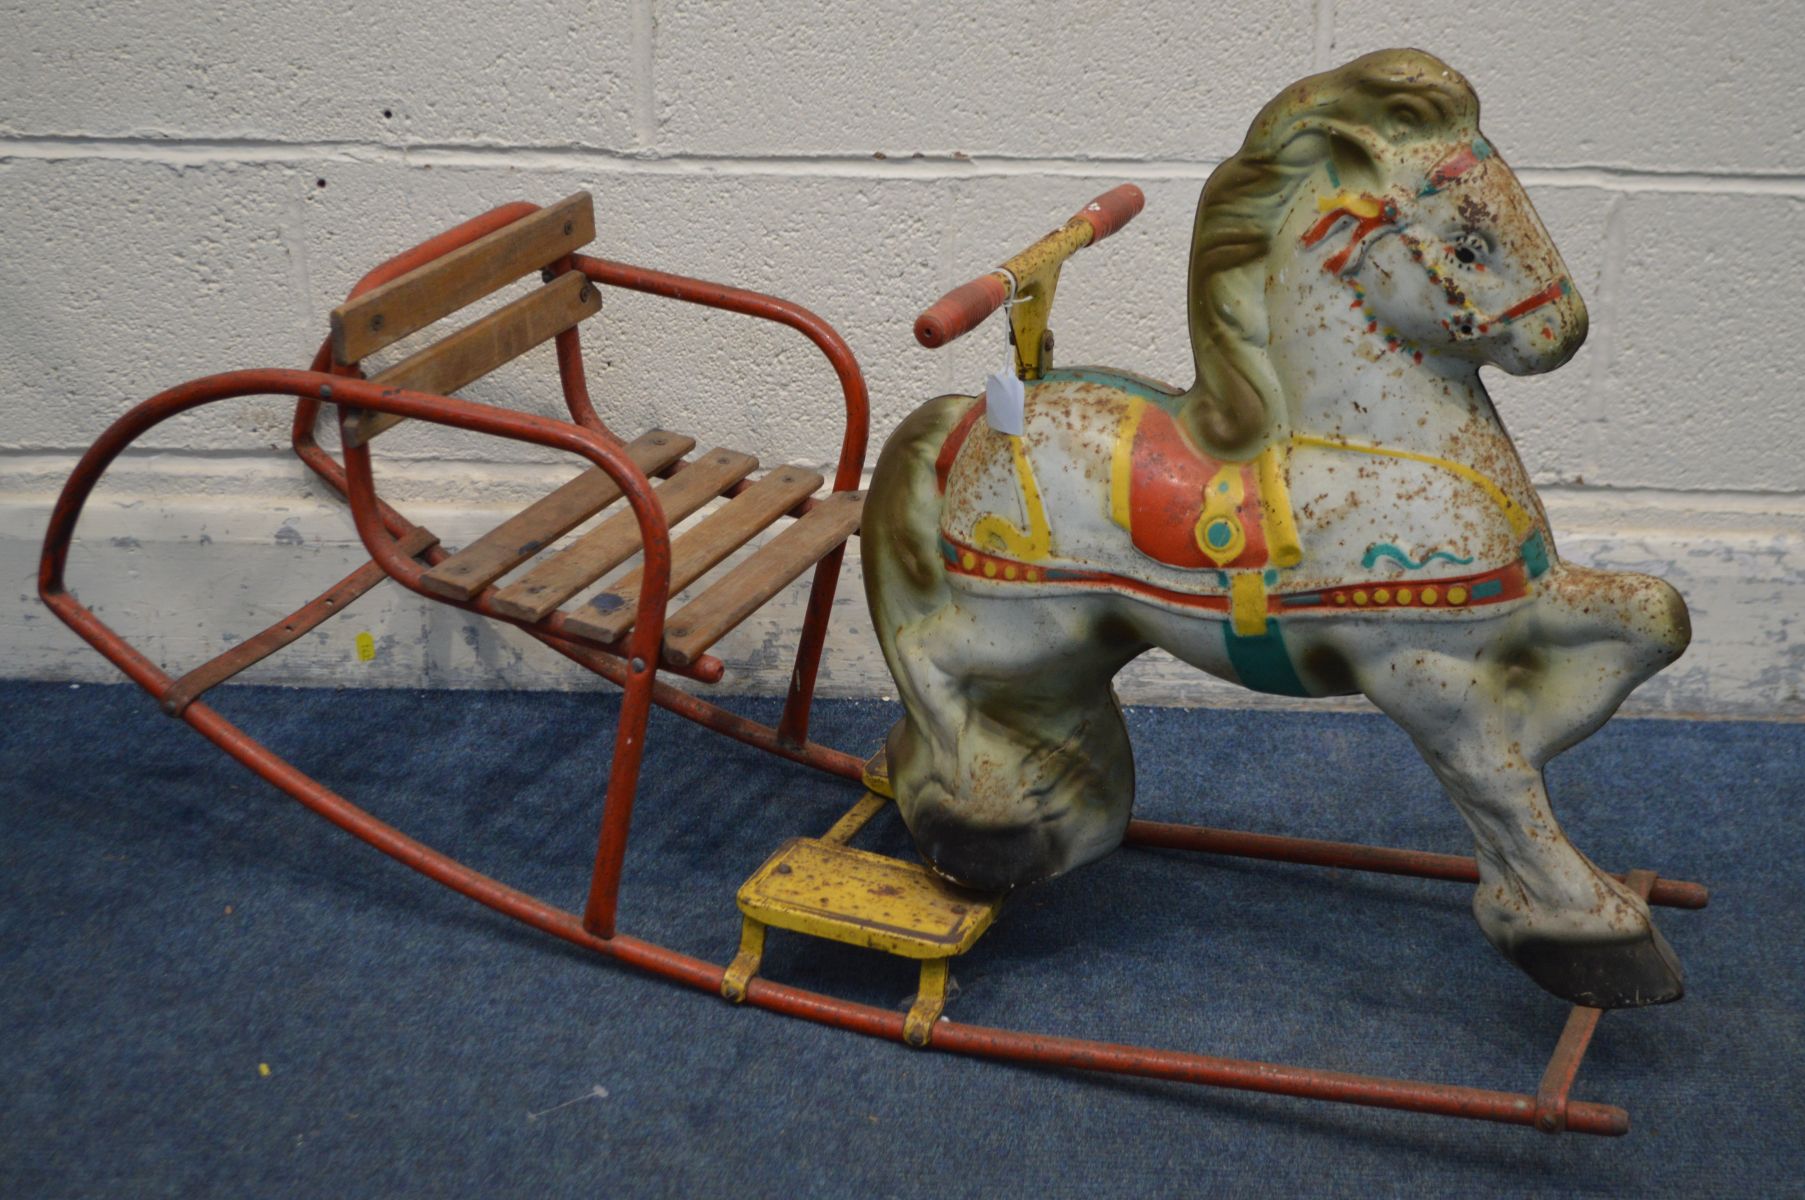 A VINTAGE MOBO CHILDS ROCKING HORSE, with slatted seat